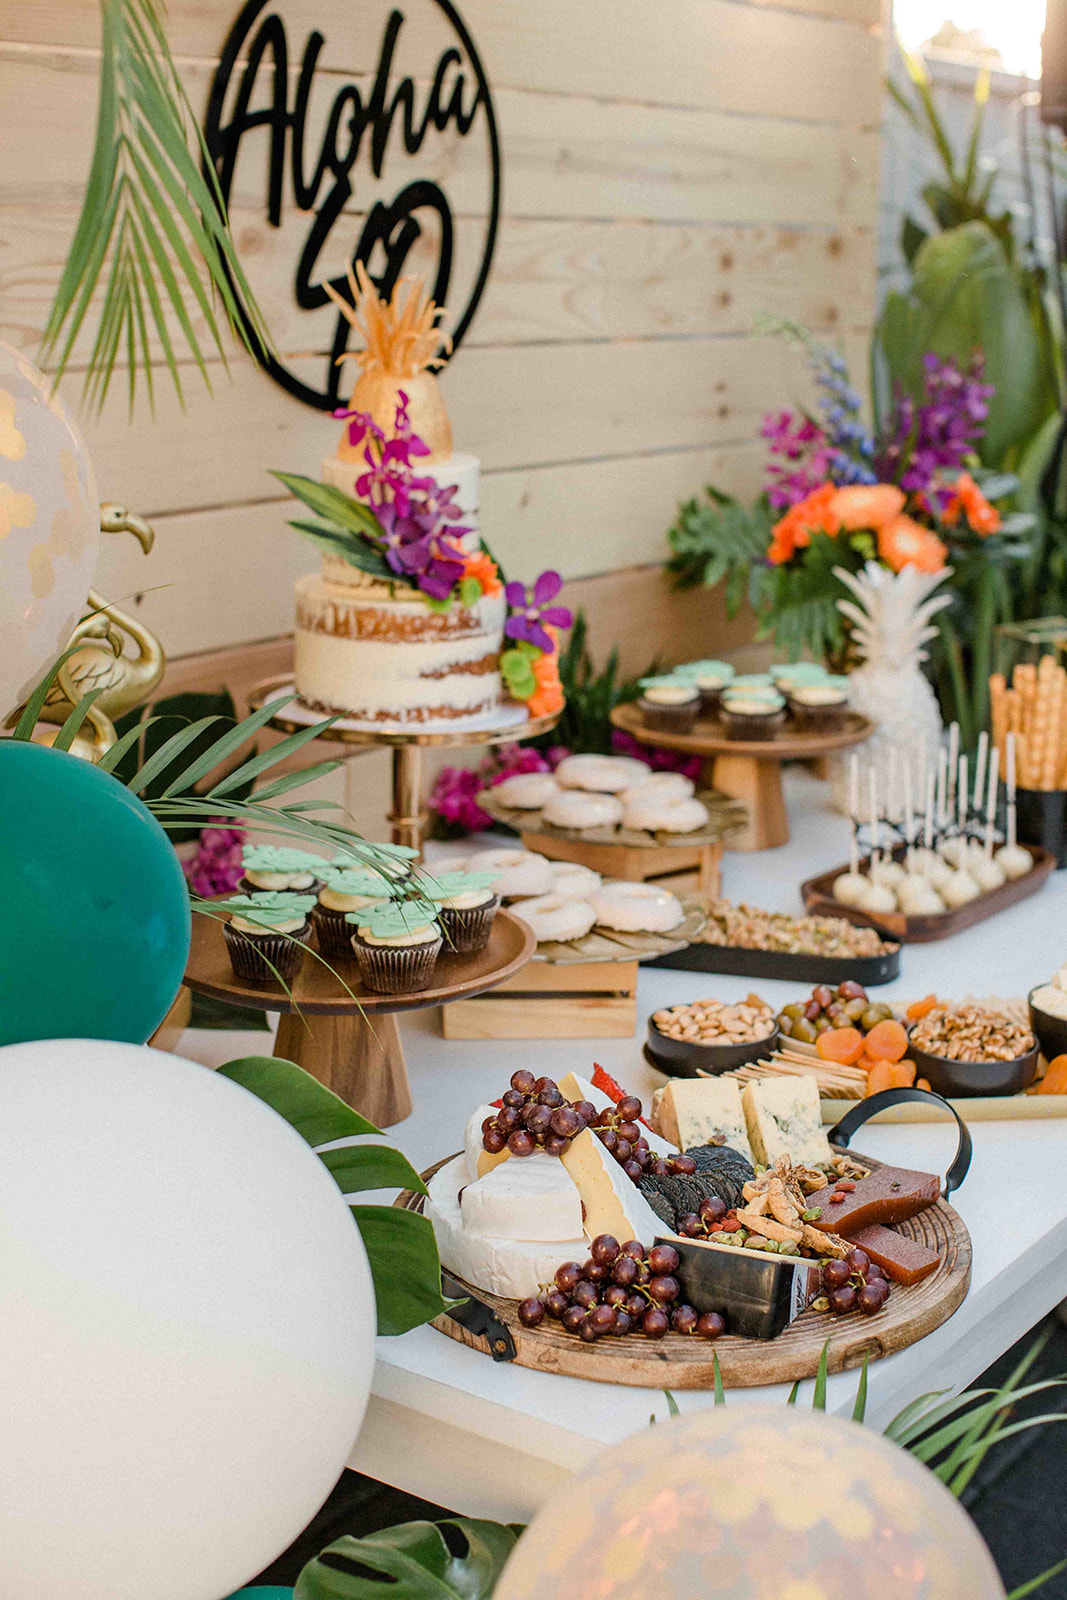 tropical luxe milestone party, A tropical luxe milestone party – Aloha 40!